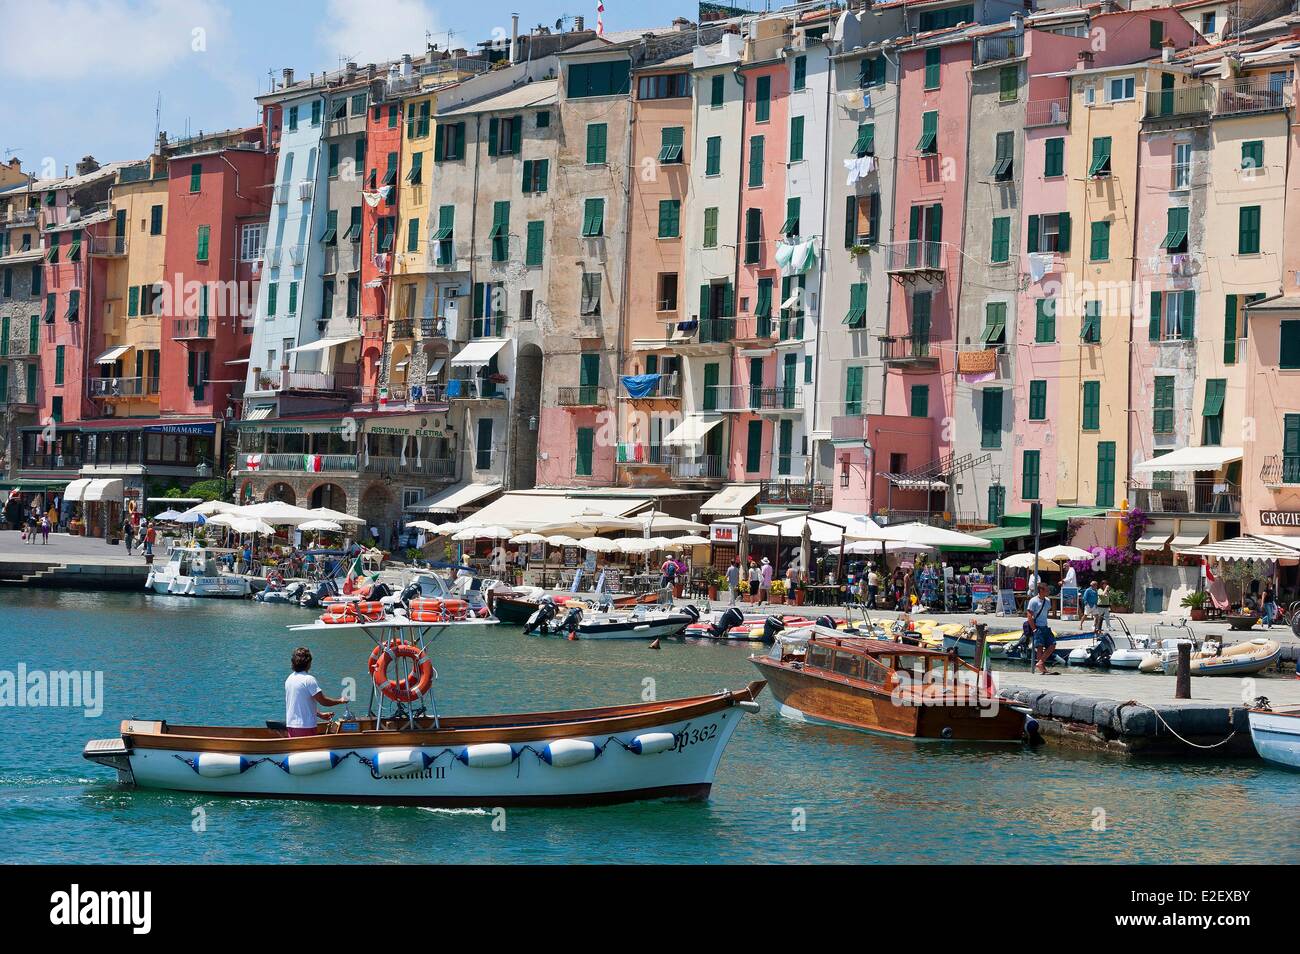 Italy, Liguria, Cinque Terre National Park listed as World Heritage Site by UNESCO, Portovenere located in the Gulf of the Poets Stock Photo